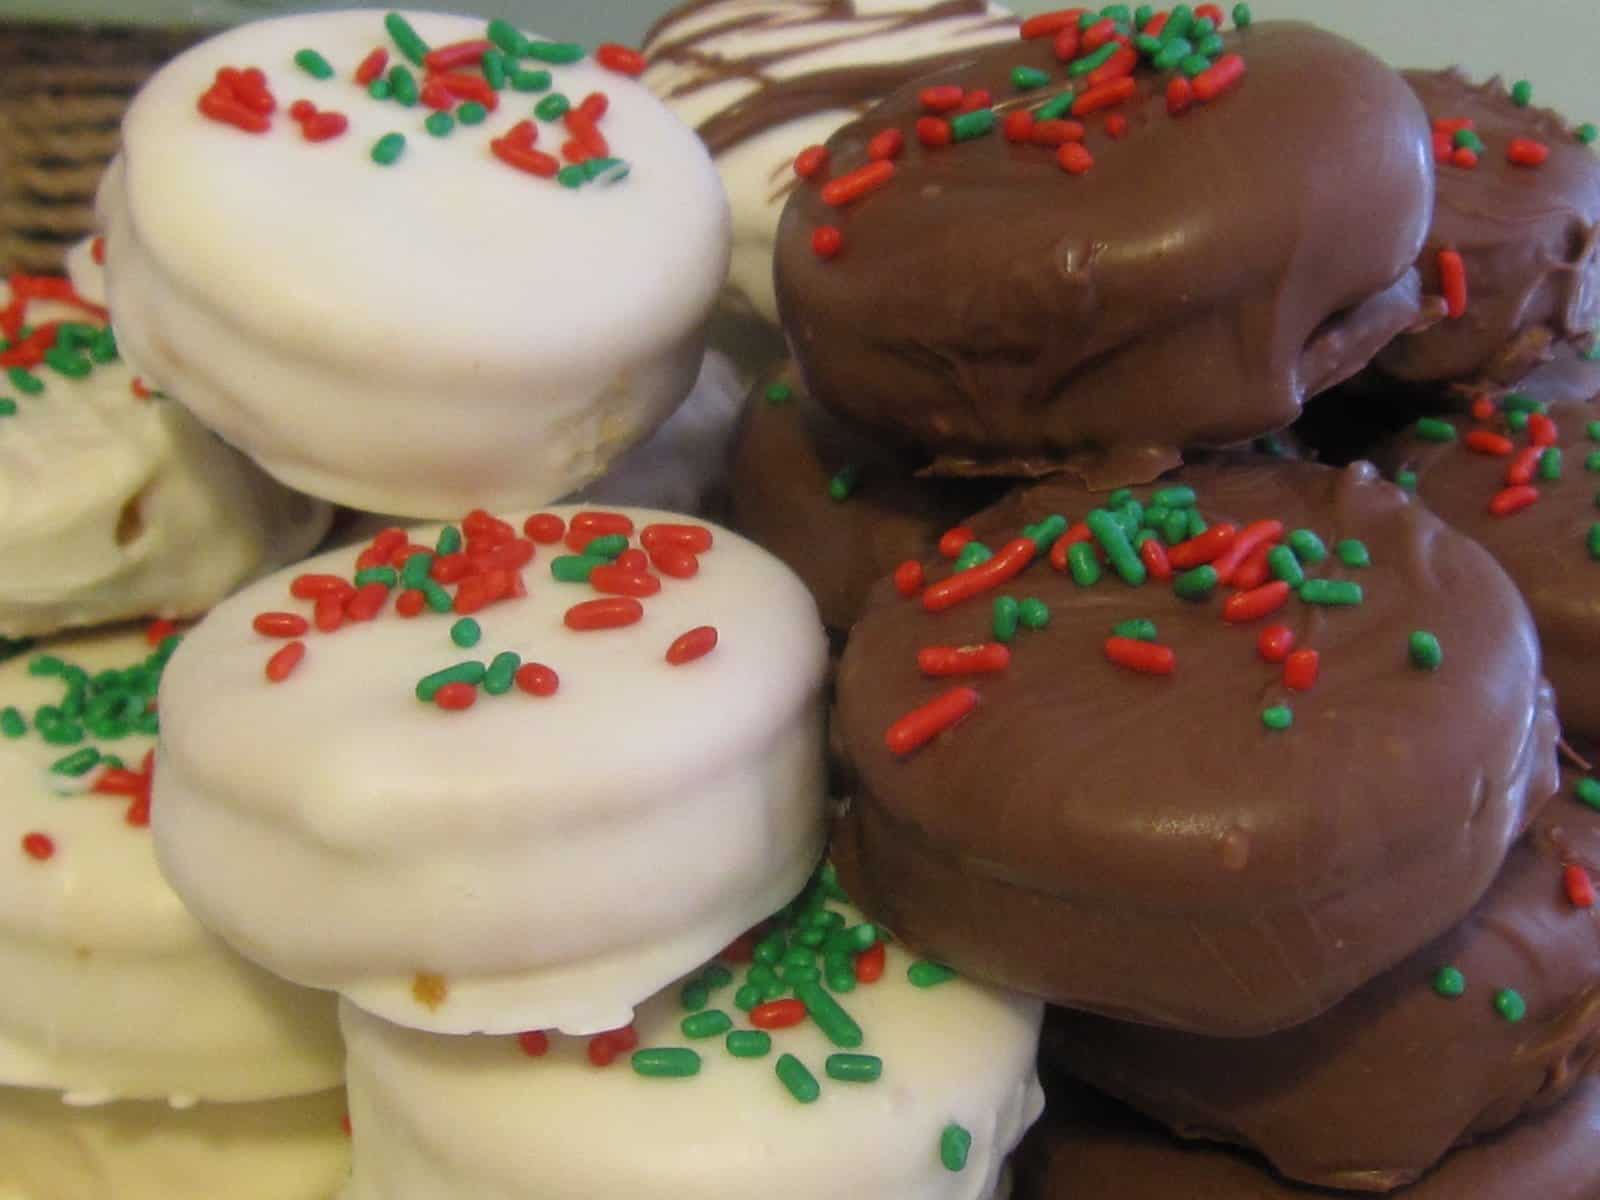 A pile of Ritz dipped in white and dark chocolate with green and red sprinkles on top